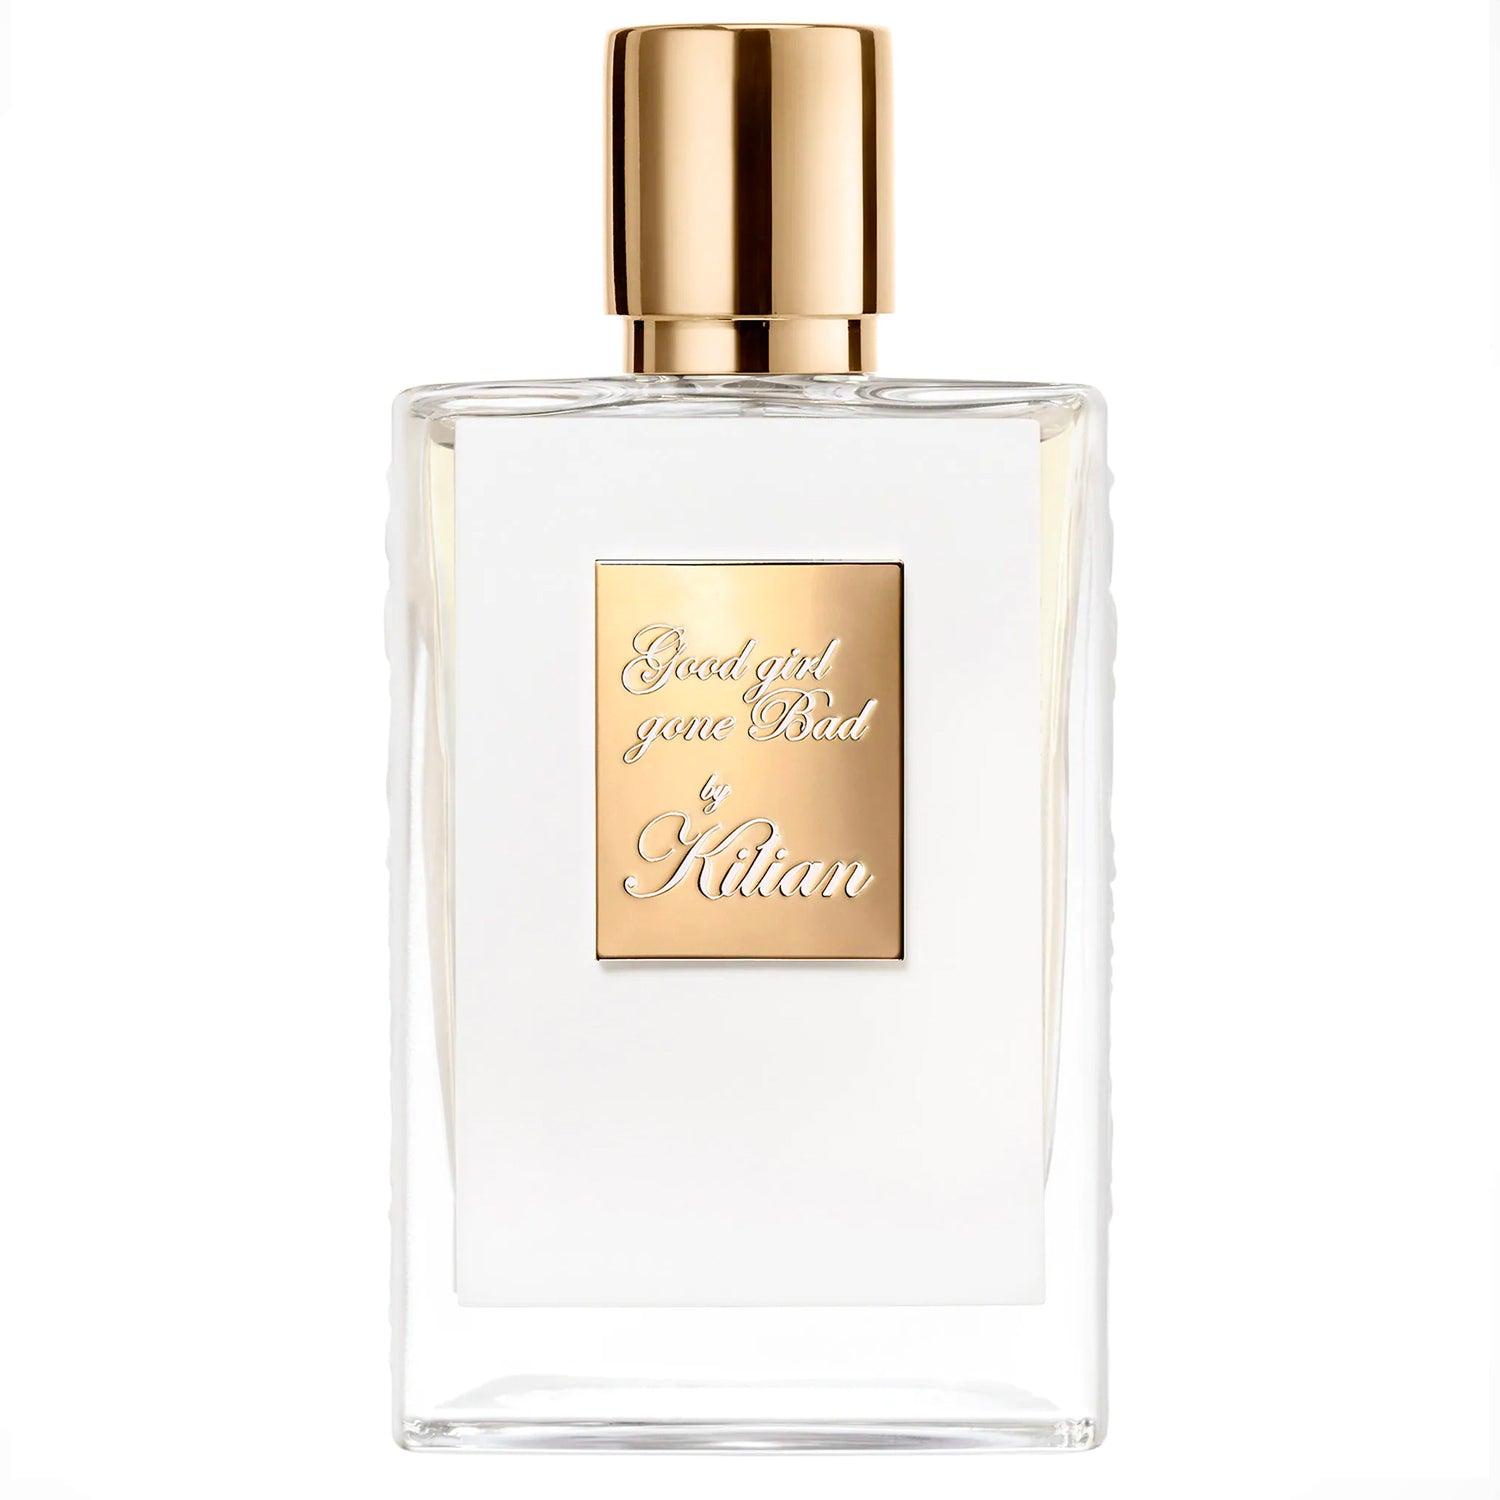 <p><span data-mce-fragment="1">This fragrance is half-innocent, half-voluptuous; the apricot-tinged osmanthus absolute, orange blossom, and rose of May absolute create the ultimate temptress. It is an explosion of the three sirens of flowers: tuberose absolute, jasmine, and narcissus.</span><br data-mce-fragment="1"><br data-mce-fragment="1"><span data-mce-fragment="1">The bottles of Kilian's Narcotics family are adorned with a distinctive white lacquer and their bottle has been meticulously engraved on each side with the representation of the Achilles shield. Like Kilian Hennessy says, "In perfumery, it is as much about seduction as it is about protection."</span><br data-mce-fragment="1"><br data-mce-fragment="1"><b data-mce-fragment="1">About the Fragrance:</b><span data-mce-fragment="1"> Good Girl Gone Bad is part of the Kilian Narcotics family. From rose to tuberose, from orange blossom to gardenia—Kilian flowers are composed like a narcotic dependence. The Perfumer is Alberto Morillas.<br><br><meta charset="utf-8">
<b data-mce-fragment="1">Fragrance Family:</b> Florals<br data-mce-fragment="1"><b data-mce-fragment="1">Scent Type:</b> Fruity Floral<br data-mce-fragment="1"><b data-mce-fragment="1">Key Notes:</b> Rose, Tuberose, Jasmine<br data-mce-fragment="1"><em data-mce-fragment="1">This version comes without clutch.</em><br></span></p>